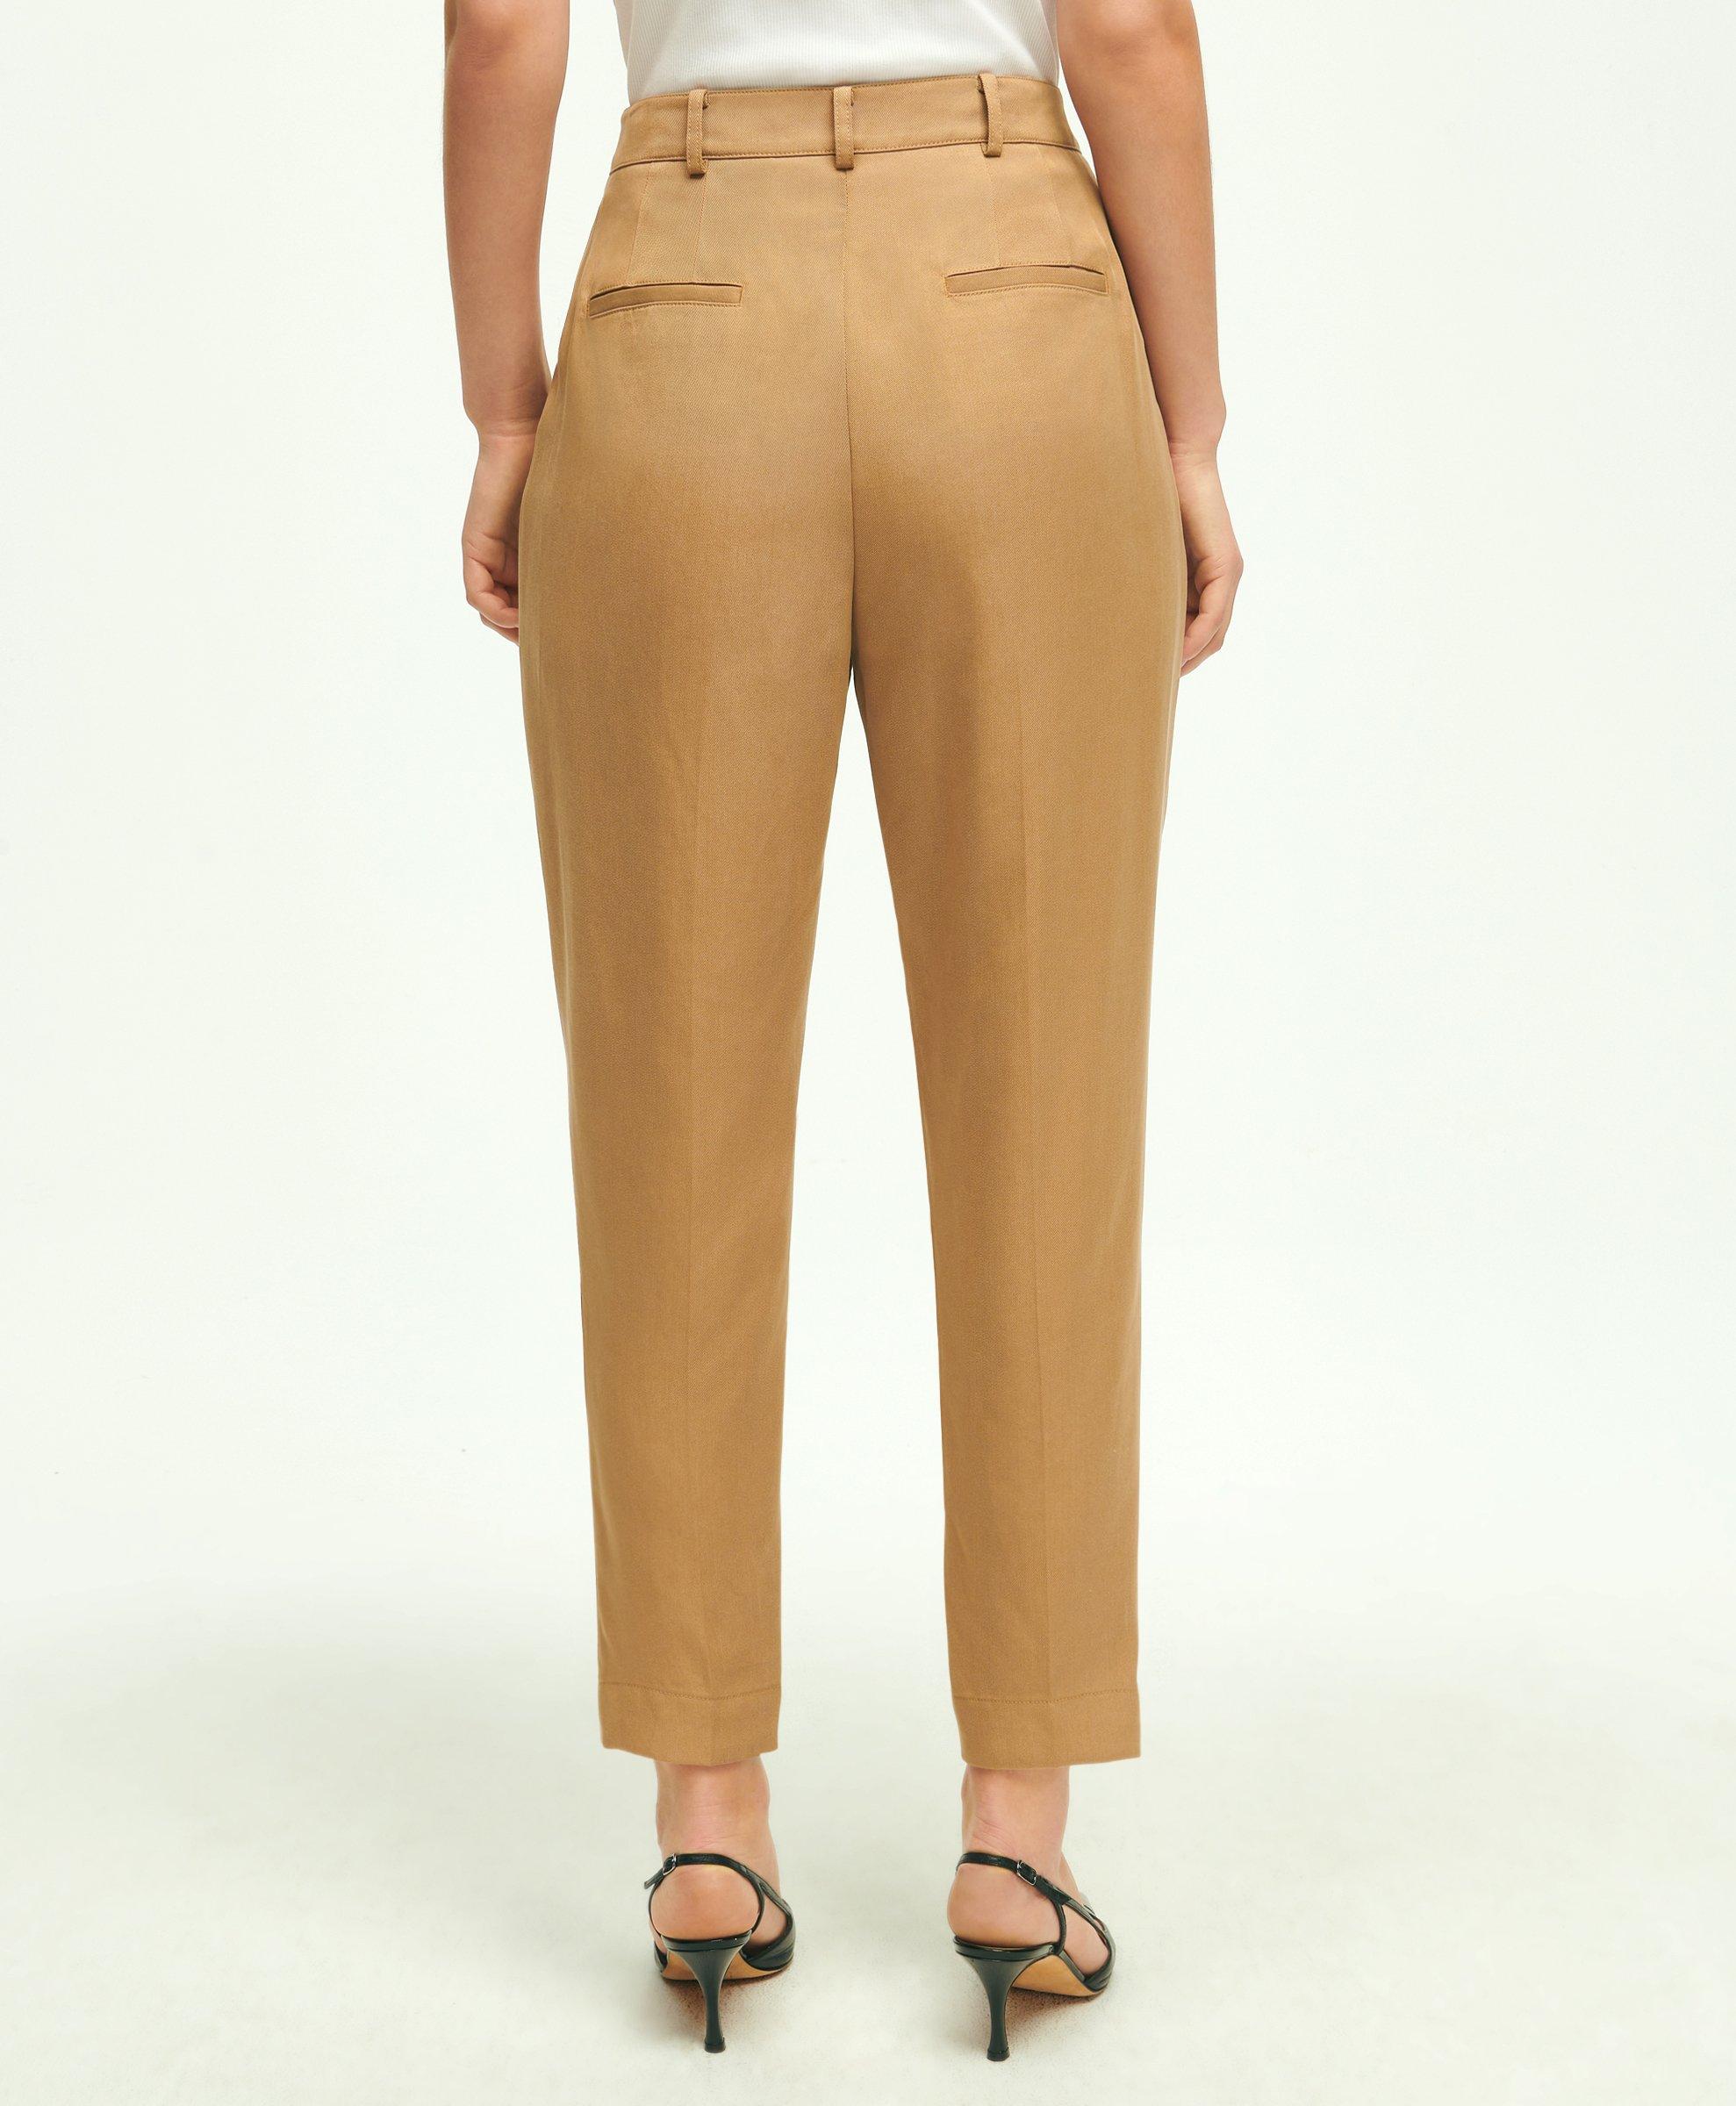 Plain Mustard Women Stretch Stylish Track Pant, Model Name/Number: Twill  Urban at Rs 300/piece in Surat